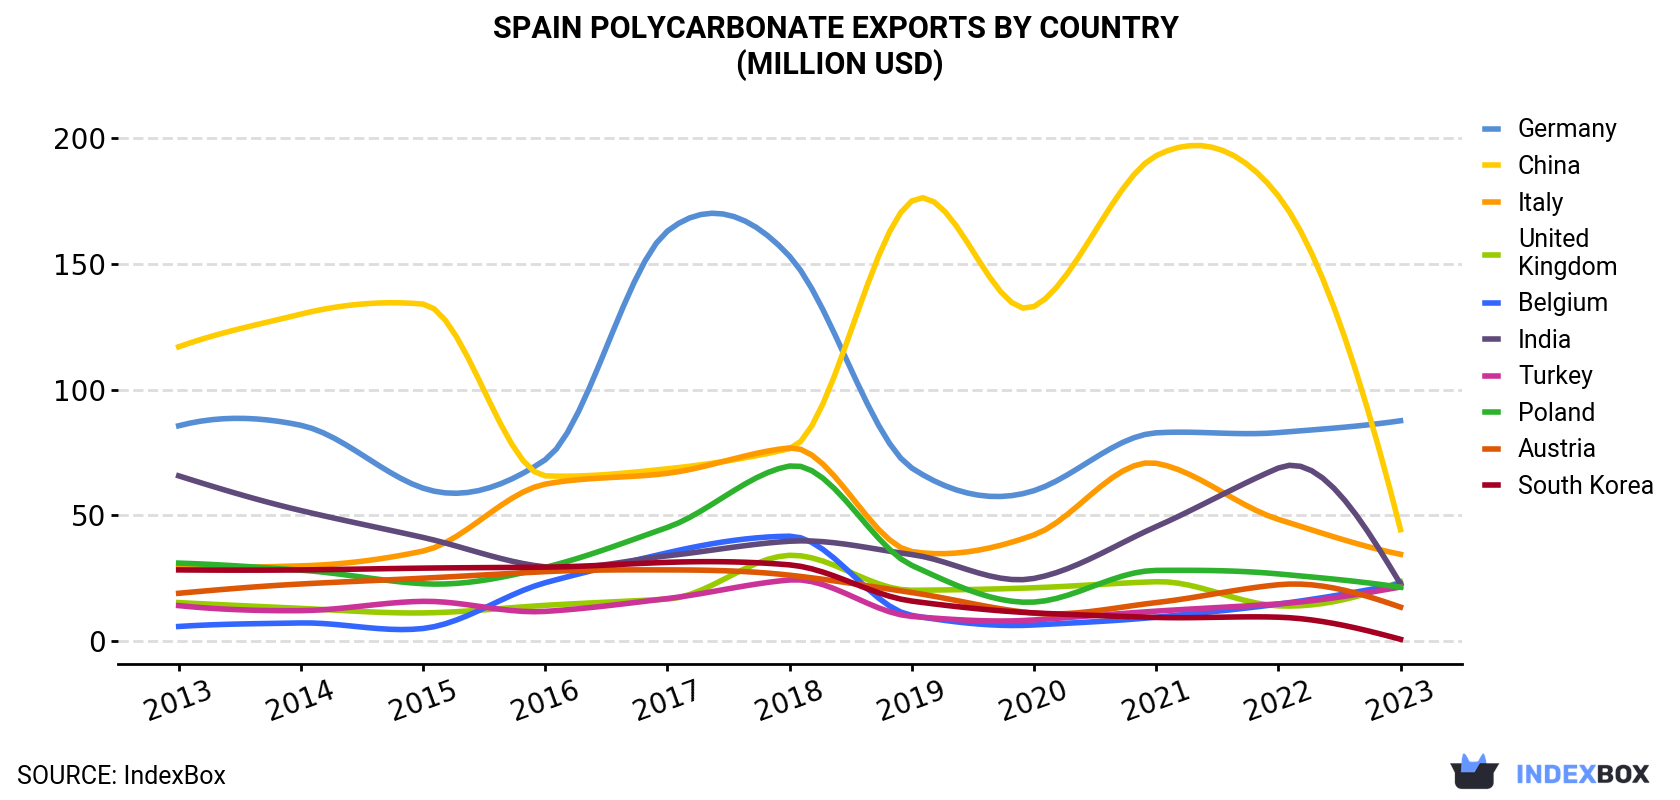 Spain Polycarbonate Exports By Country (Million USD)